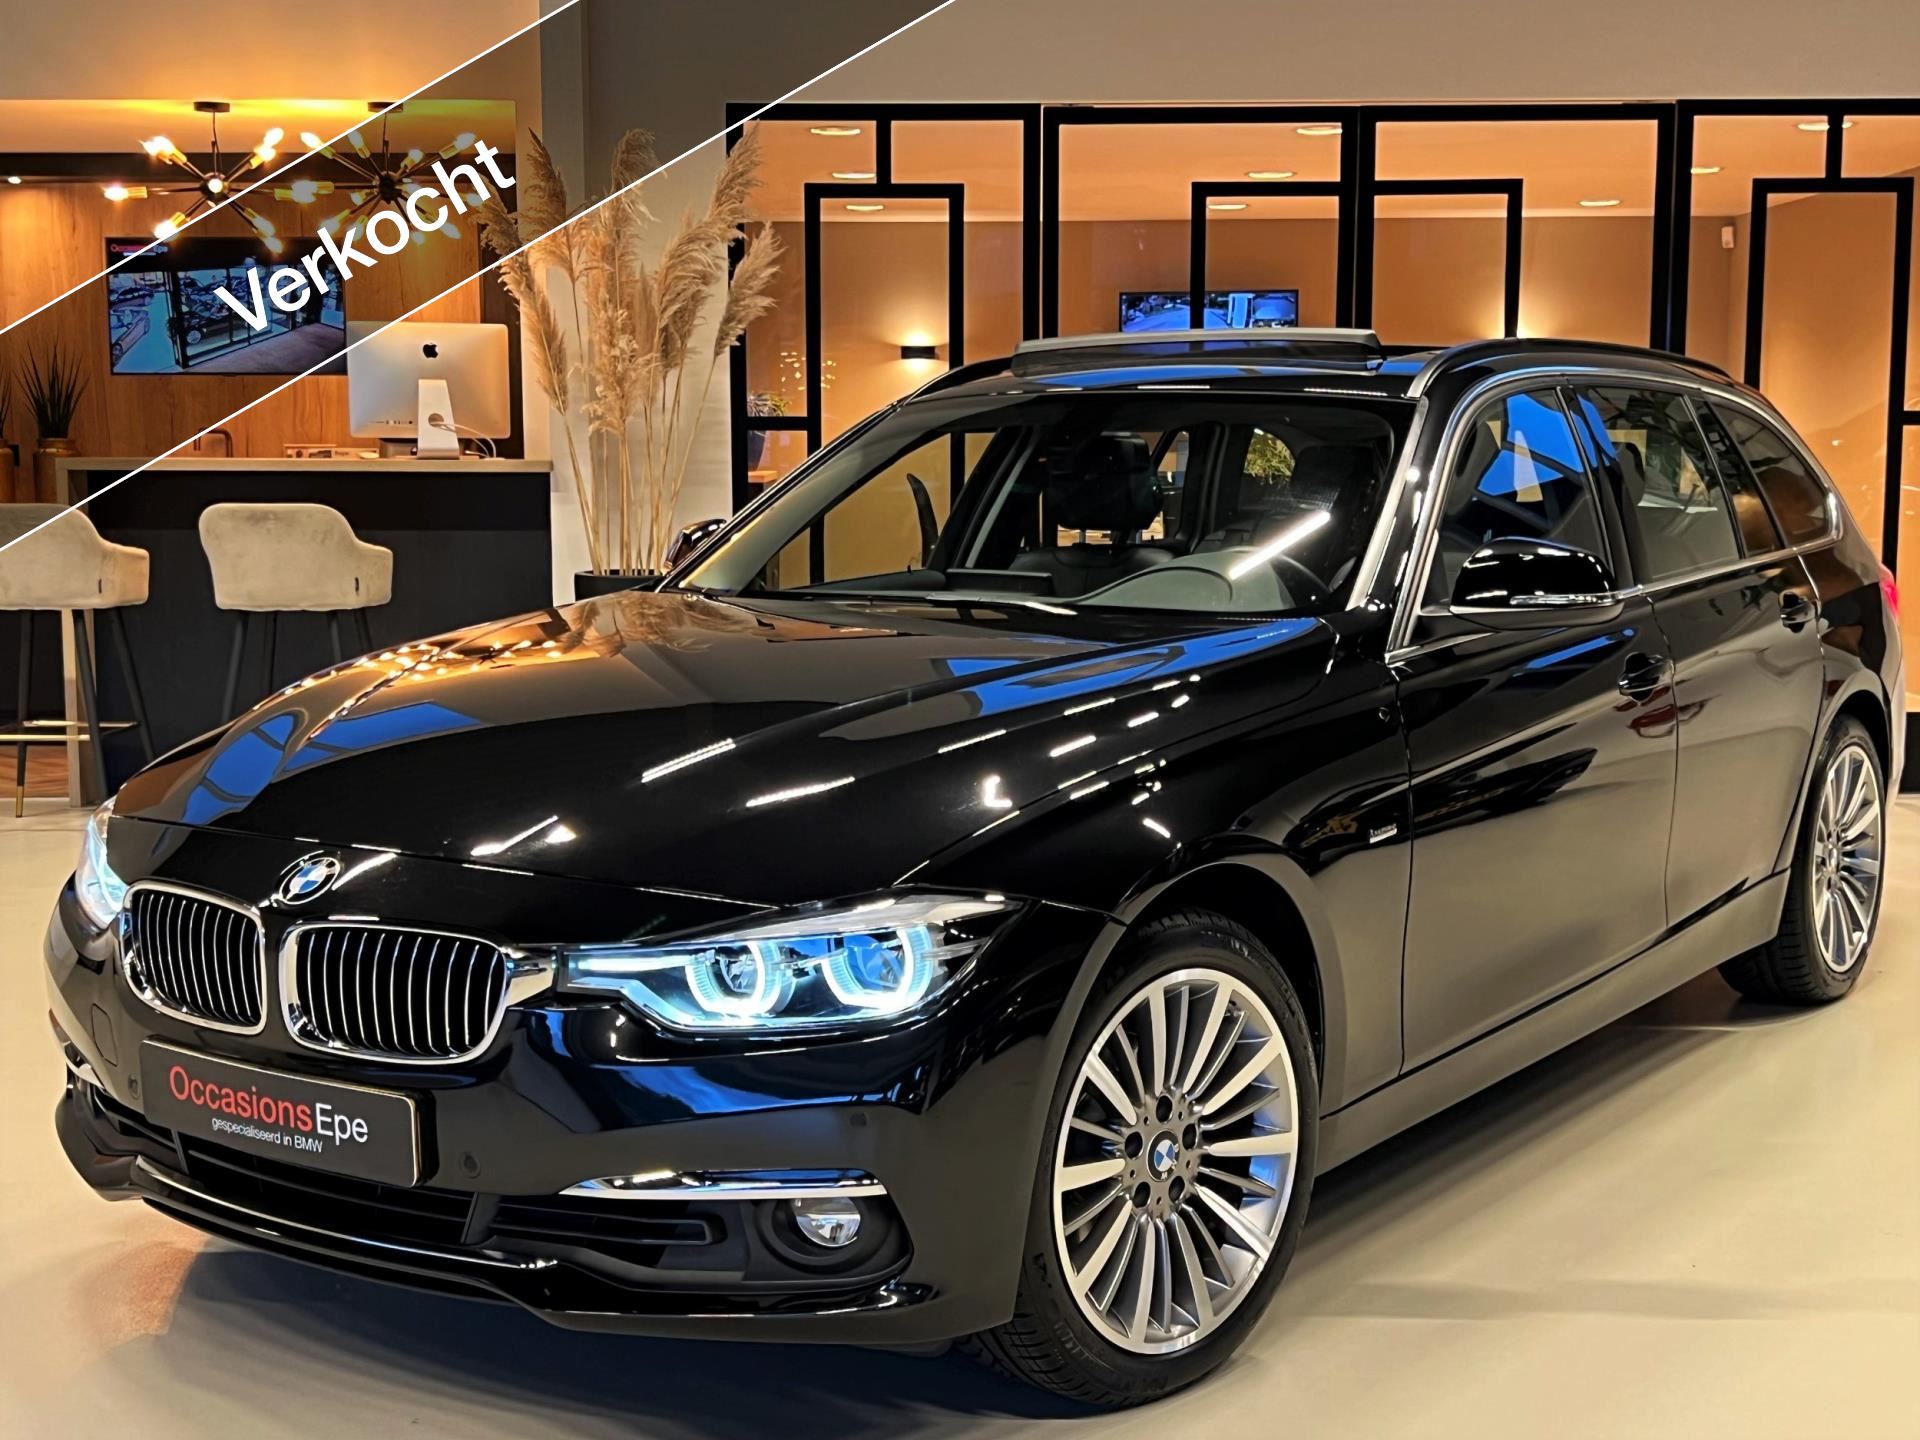 BMW 3-SERIE TOURING occasion - Occasions Epe